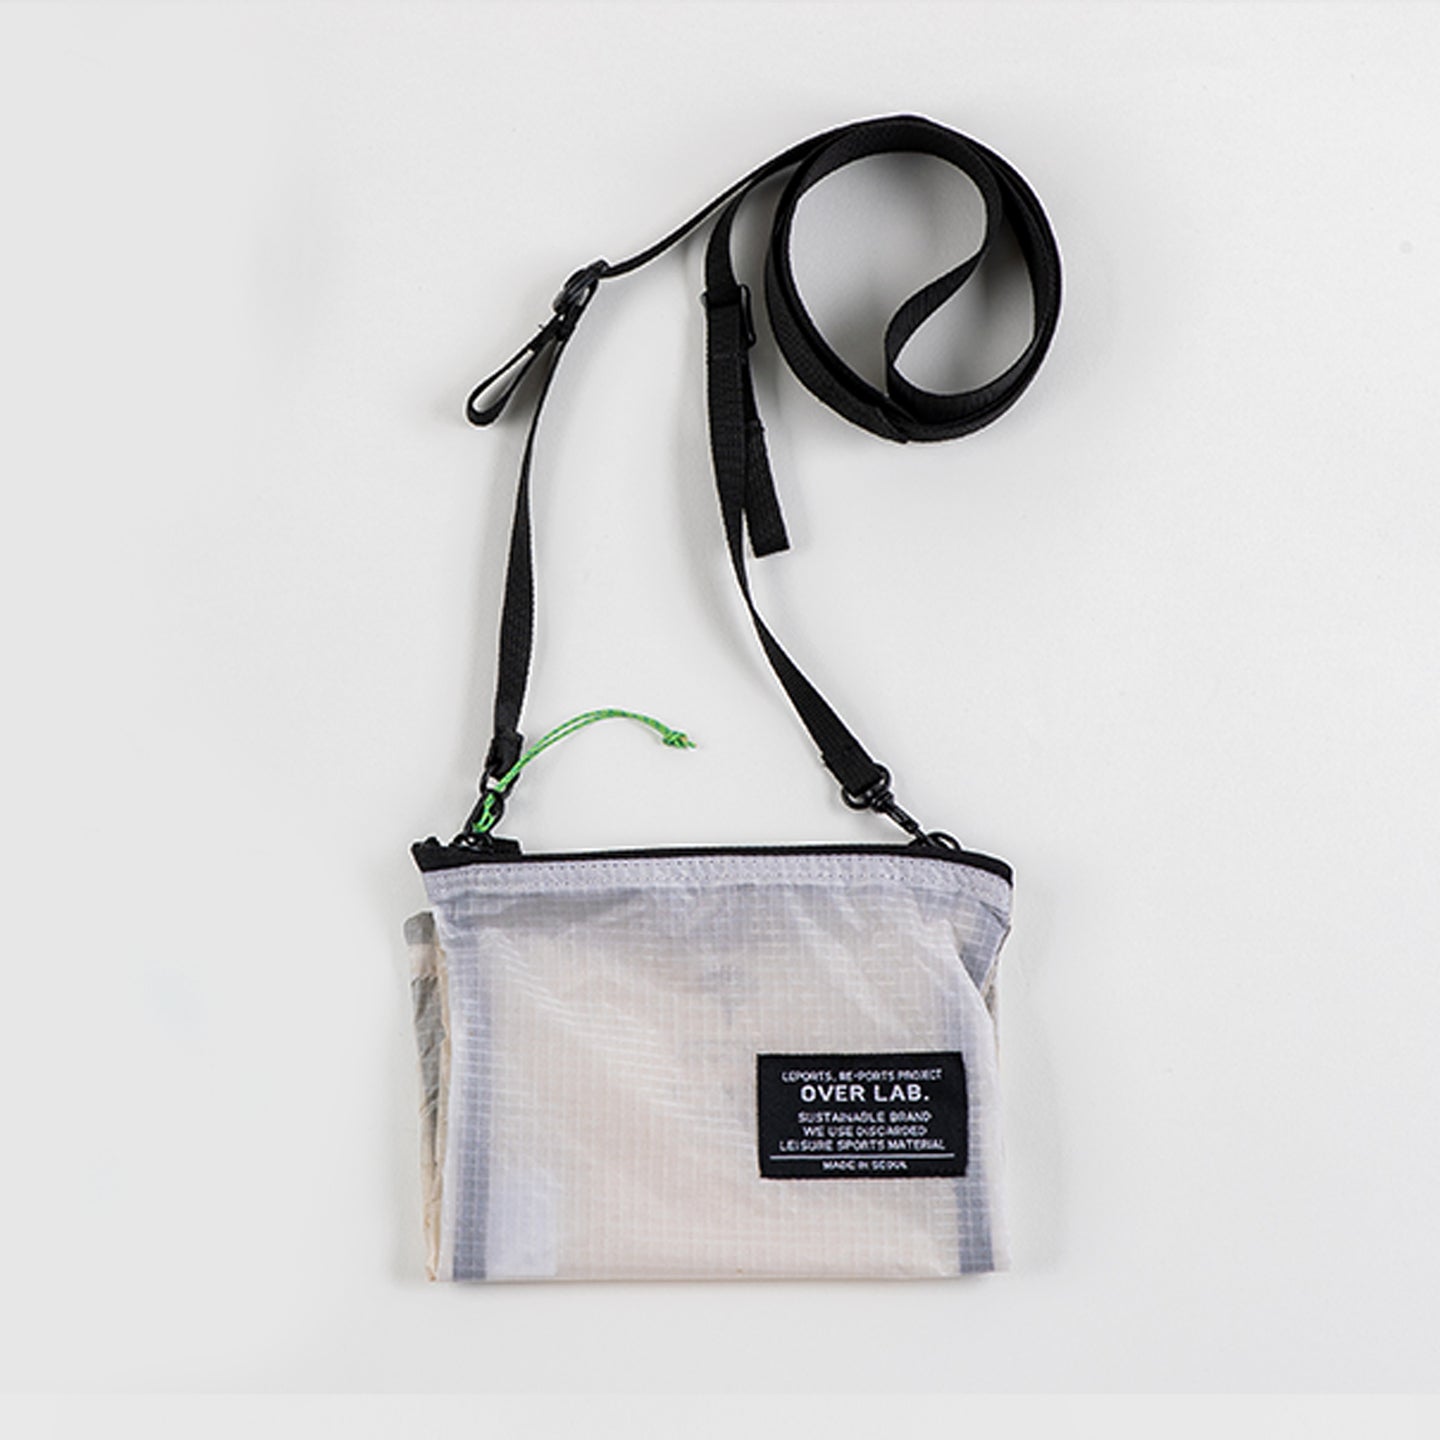 OVER LAB Another High folding Sacoche Bag WHITE